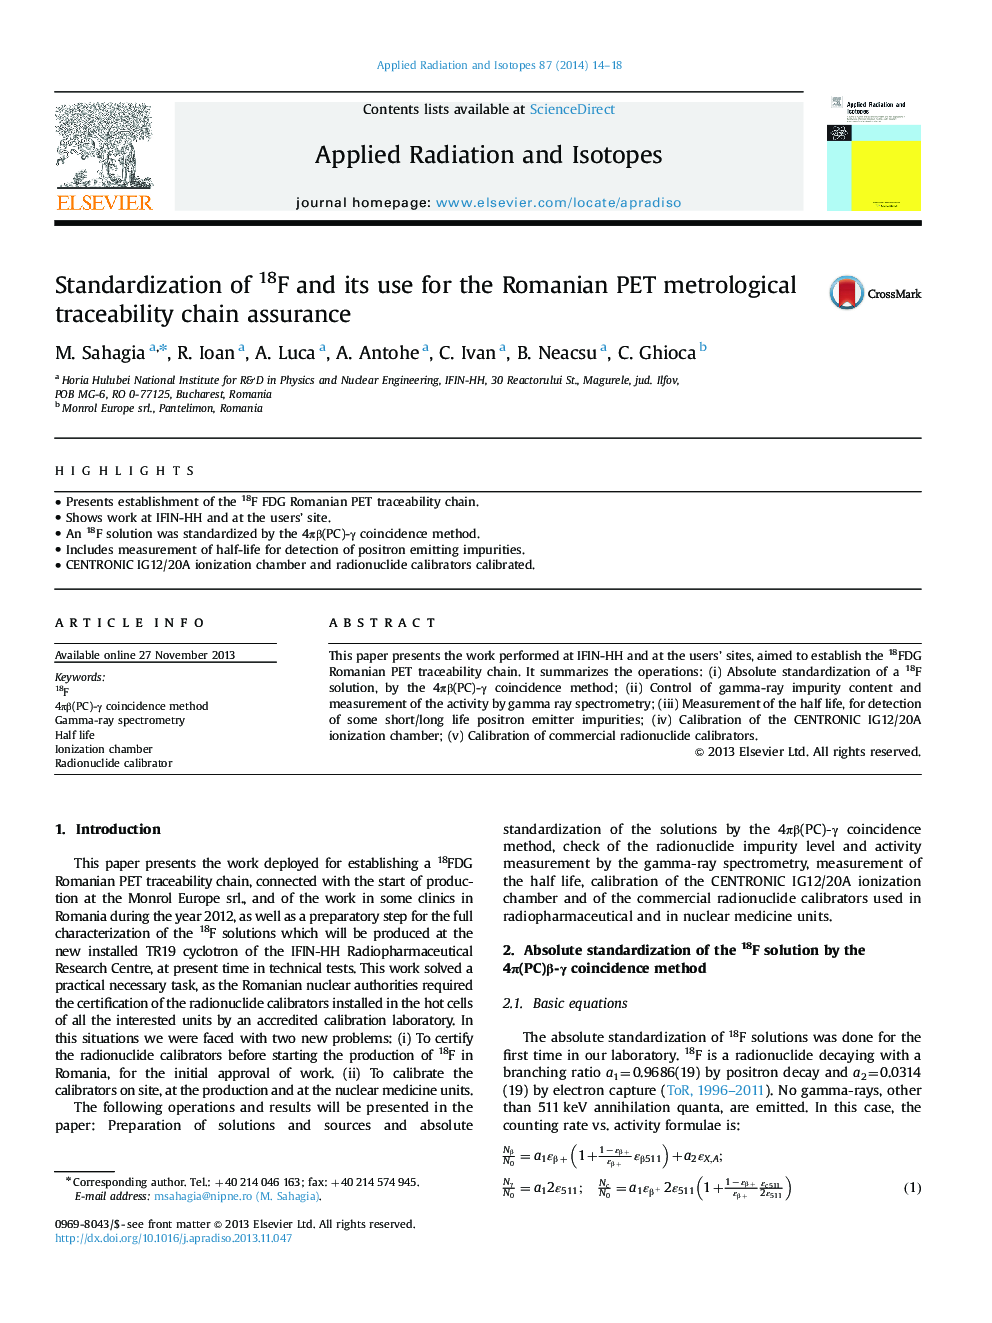 Standardization of 18F and its use for the Romanian PET metrological traceability chain assurance